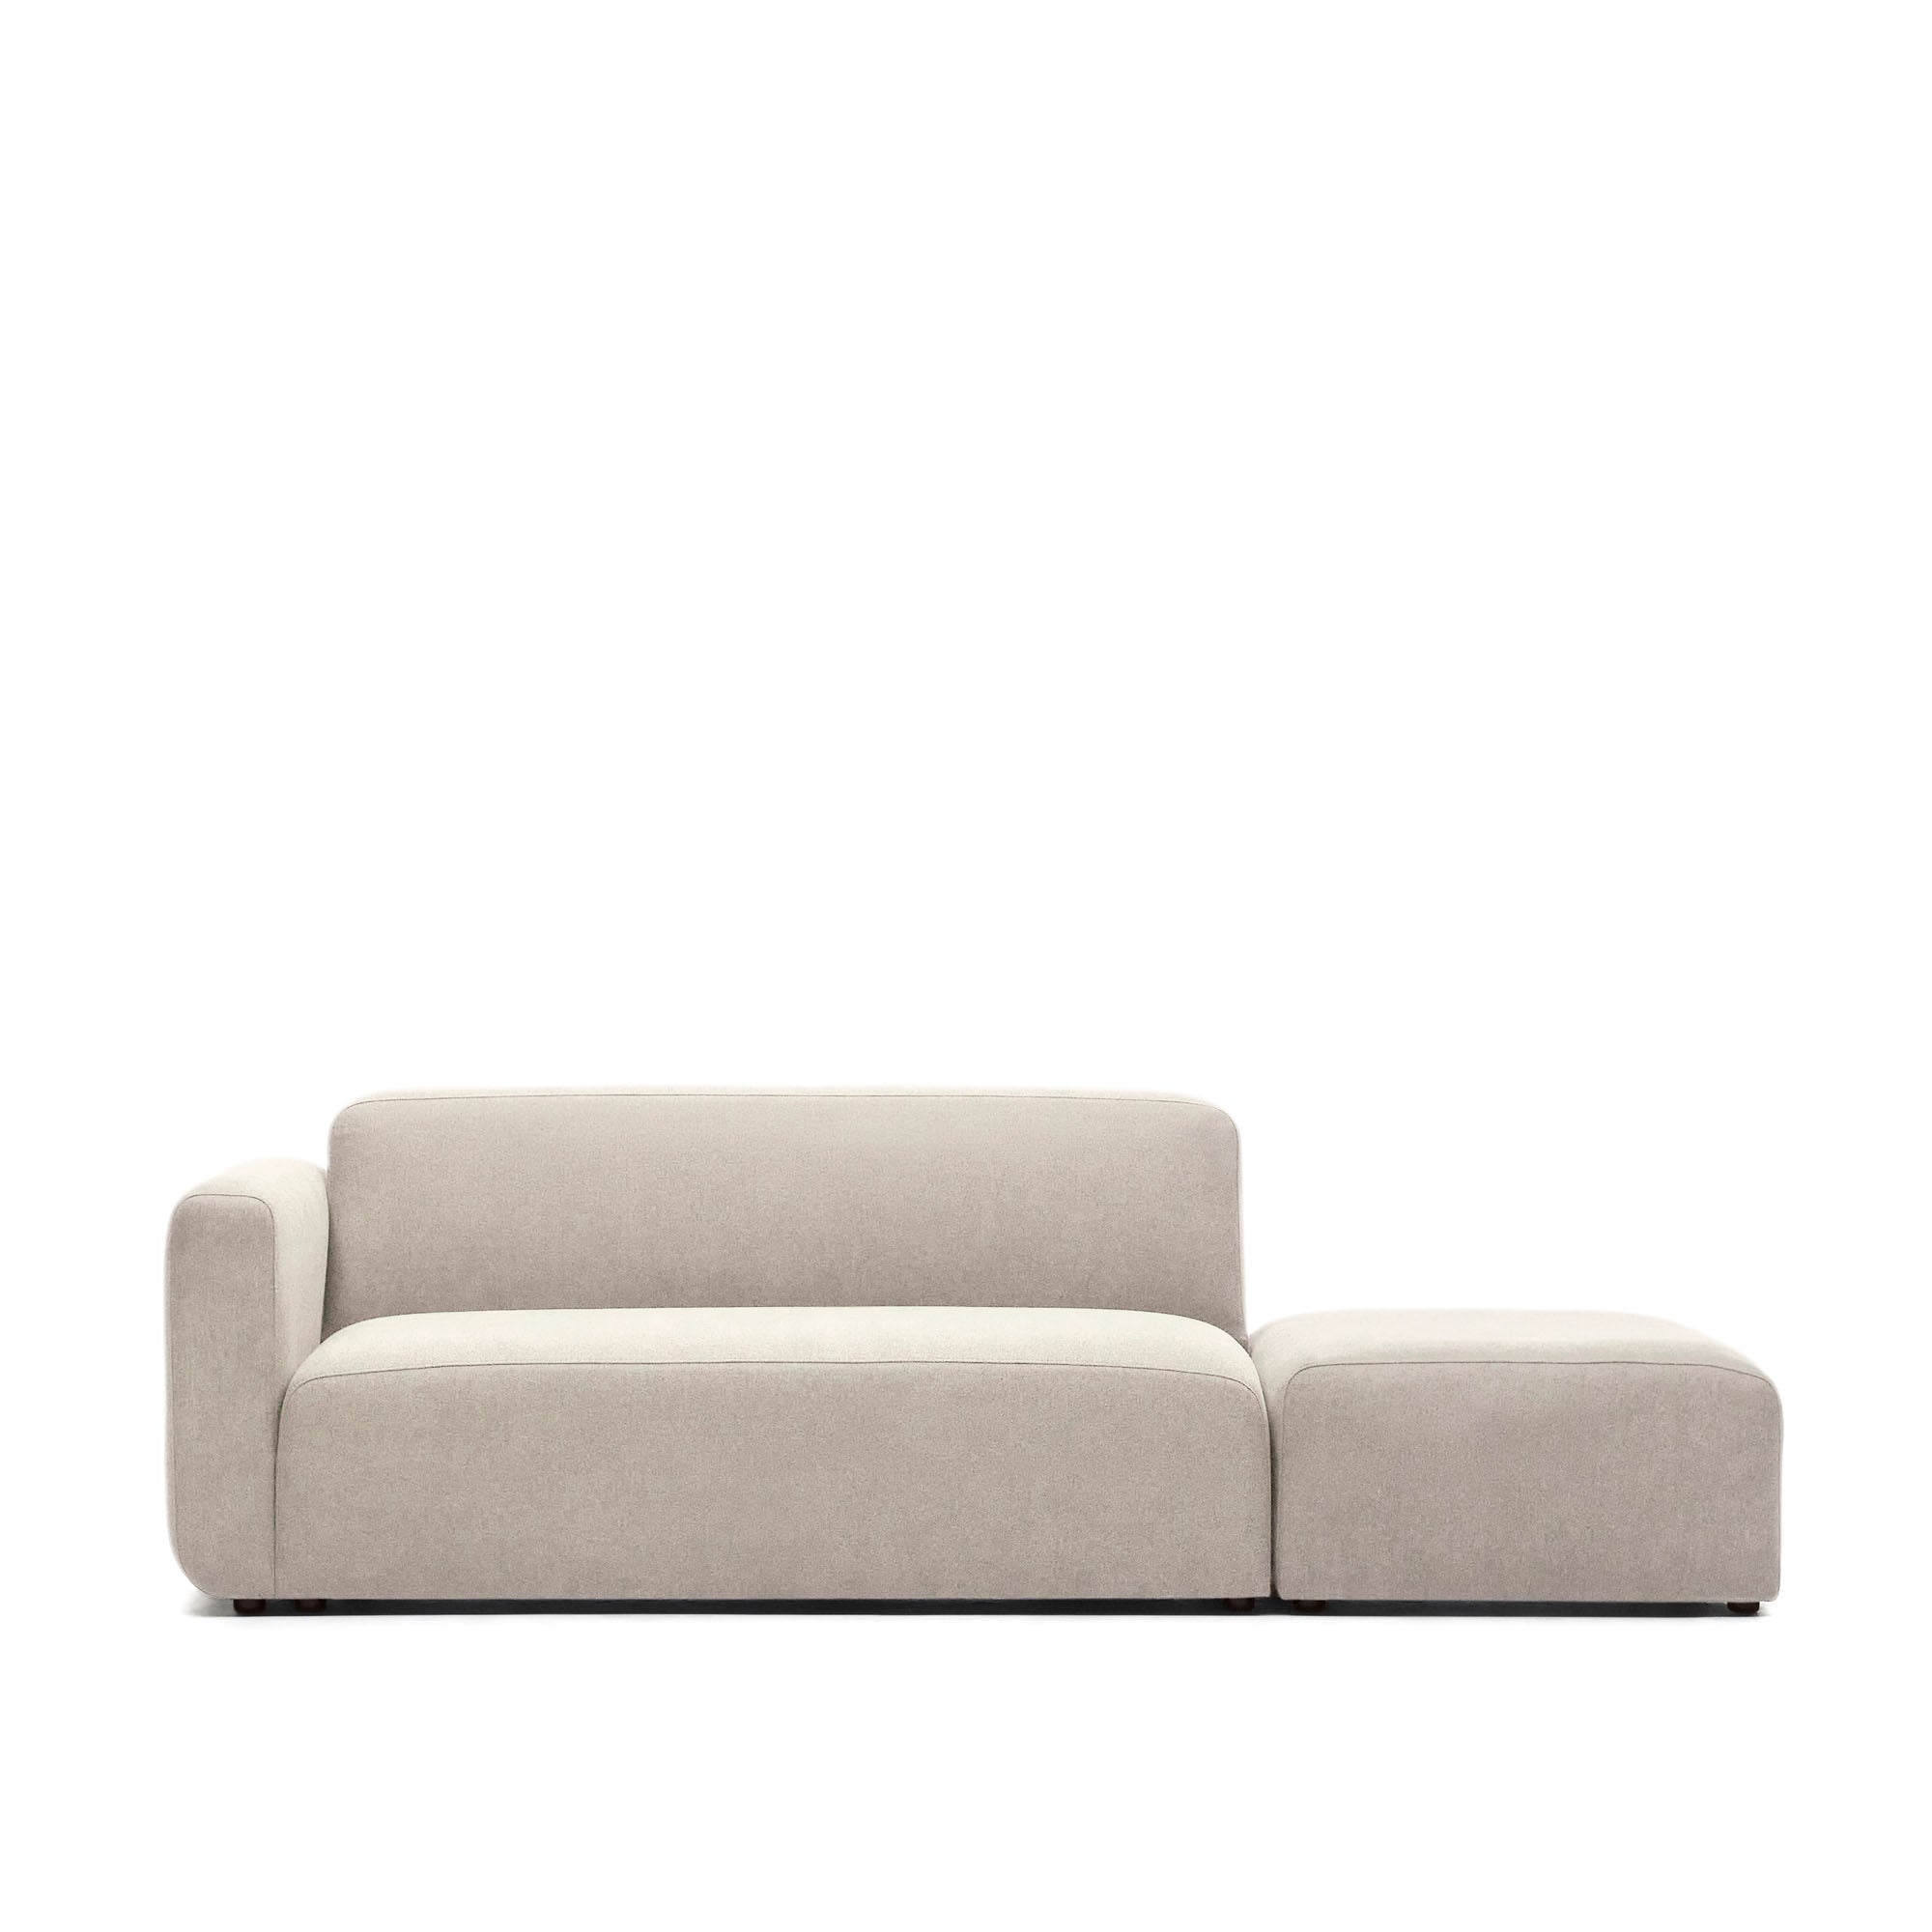 Neom 2 seater modular sofa with back module in beige, 244 cm